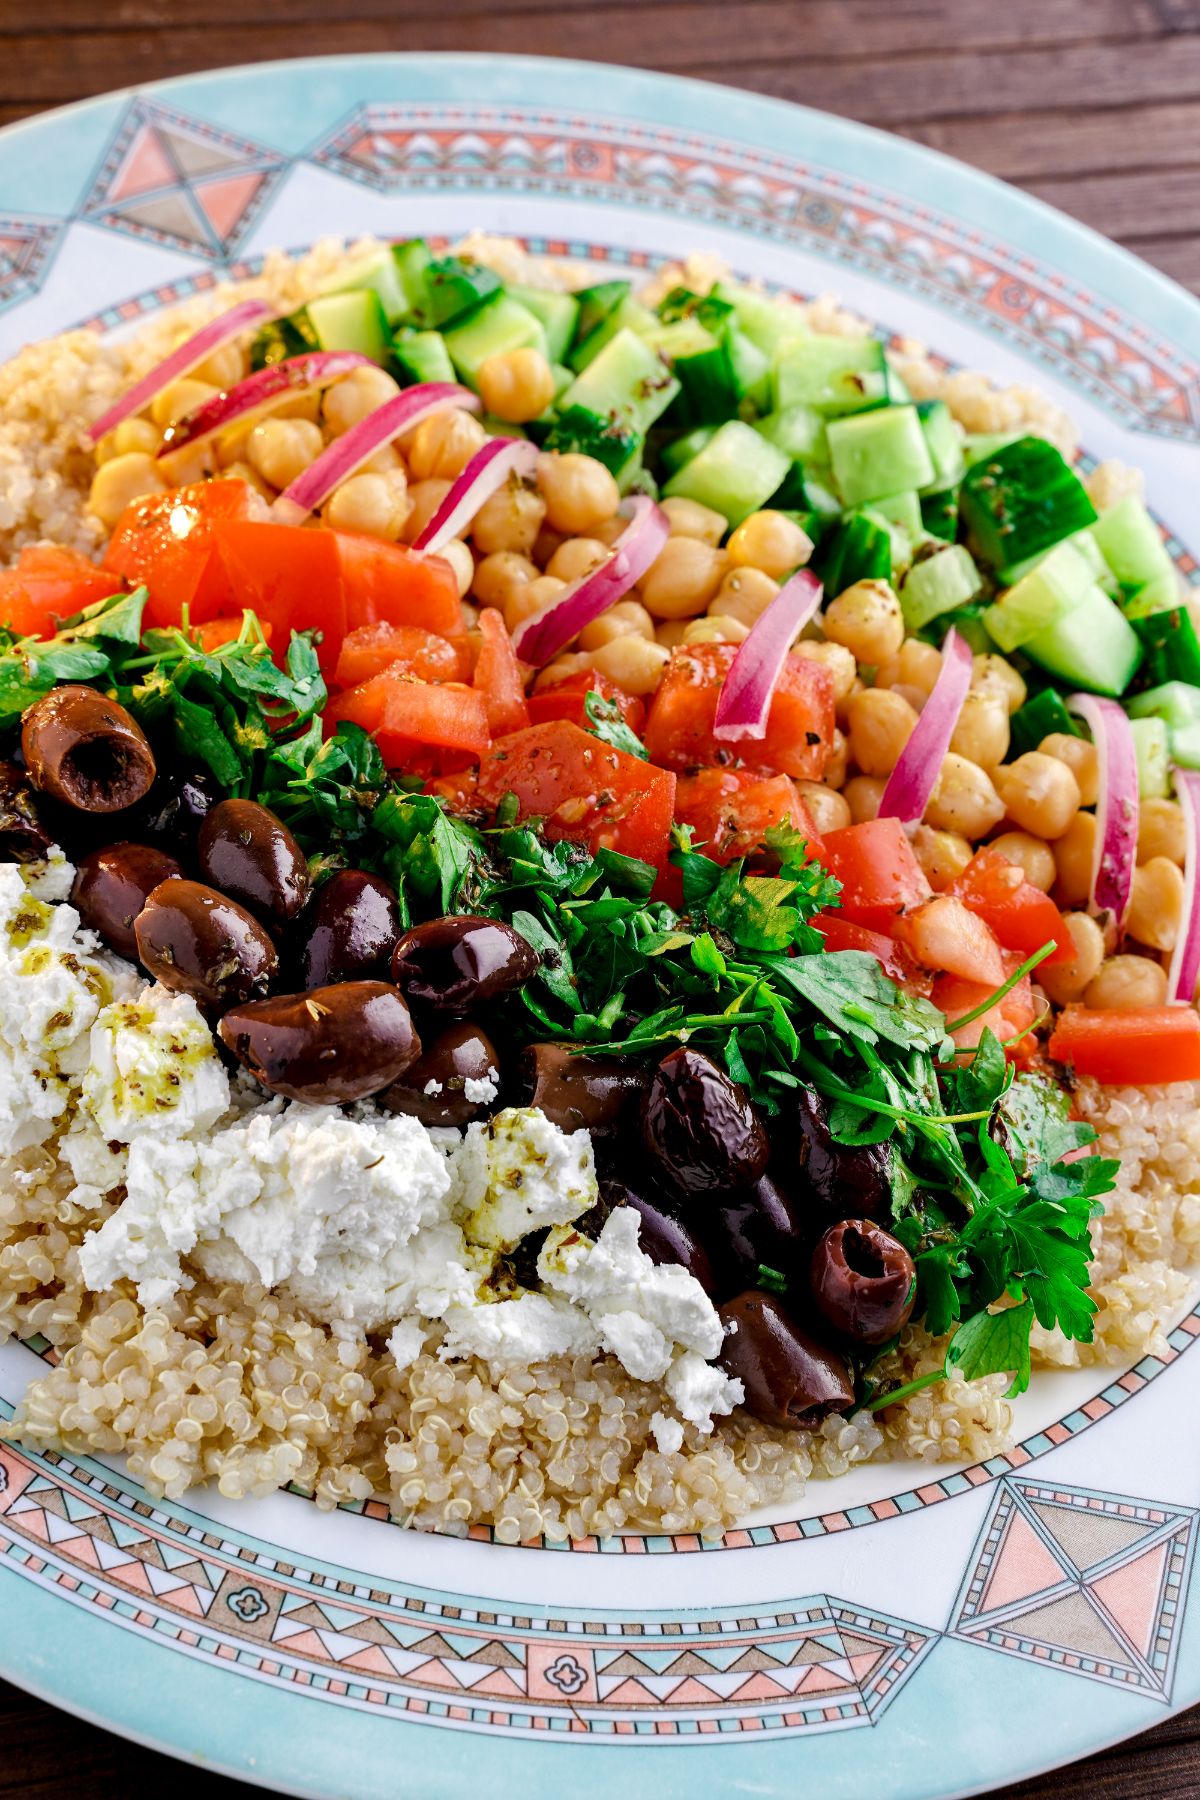 blue patterned plate topped with layers of vegetables and quinoa for salad